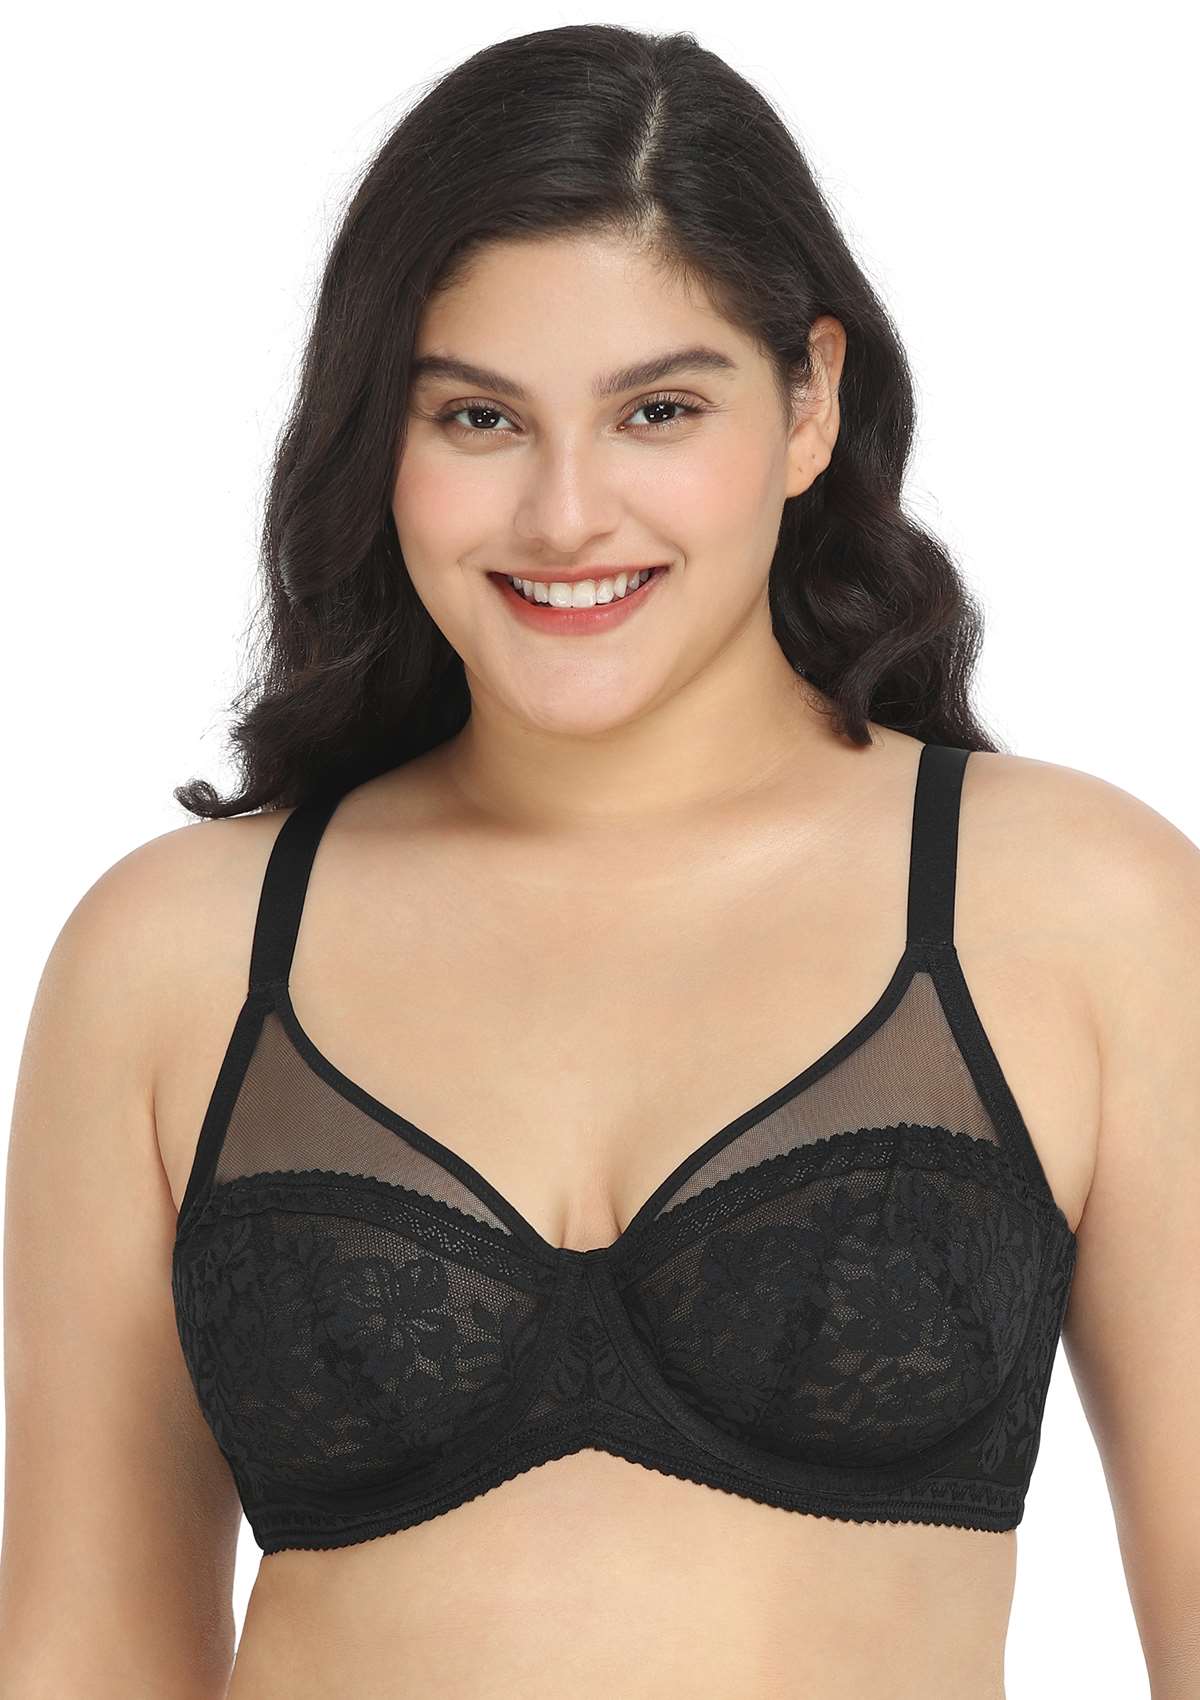 HSIA Gladioli Lace Mesh Minimizing Unlined Underwire Bra For Fuller Busts - Black / 42 / G